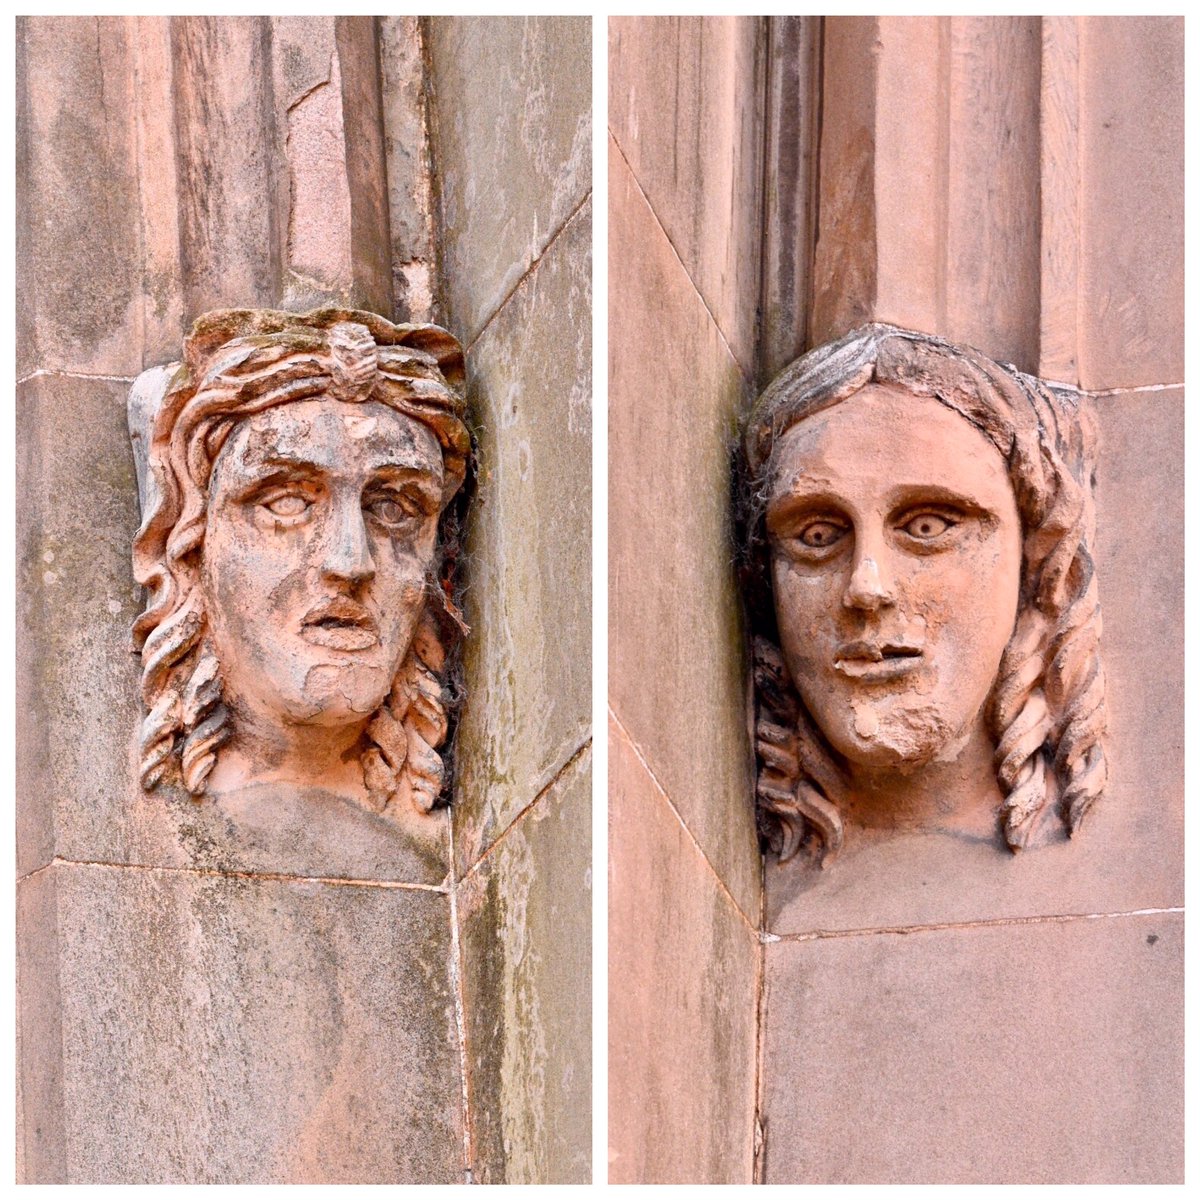 The old buildings at Gartnavel Royal Hospital were once the Glasgow Lunatic Asylum (ugh). There are interesting carved heads at the entrances. These two women represent for me every woman who passed through the doors.  #WomenMakeHistory  @womenslibrary